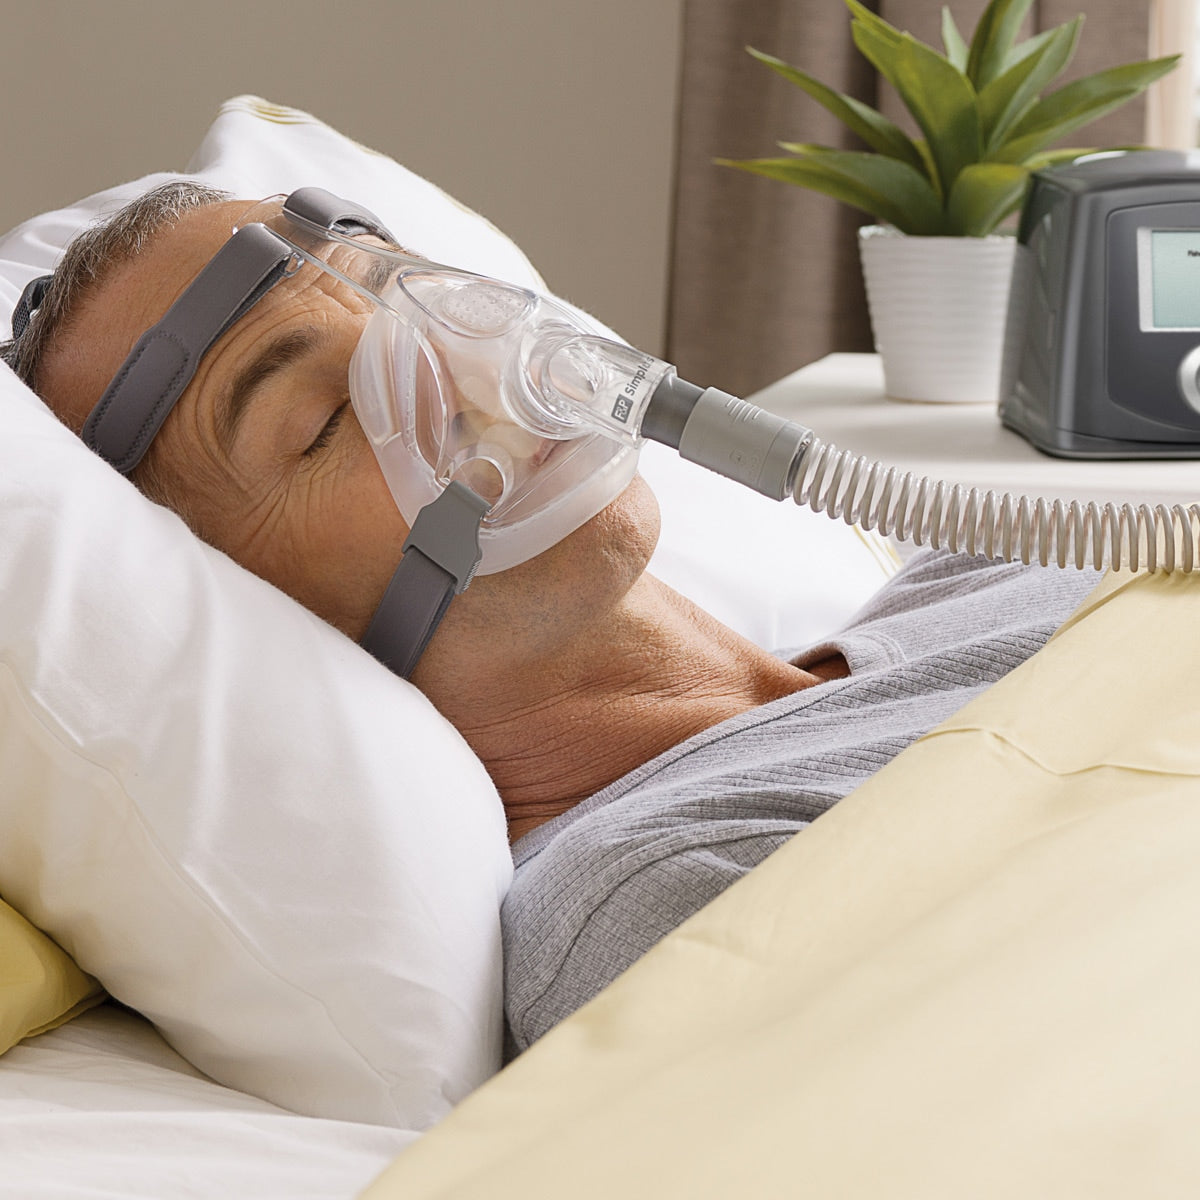 F&P Simplus Full Face CPAP/BiPAP Mask with Headgear (Includes Extra Cushion Free)